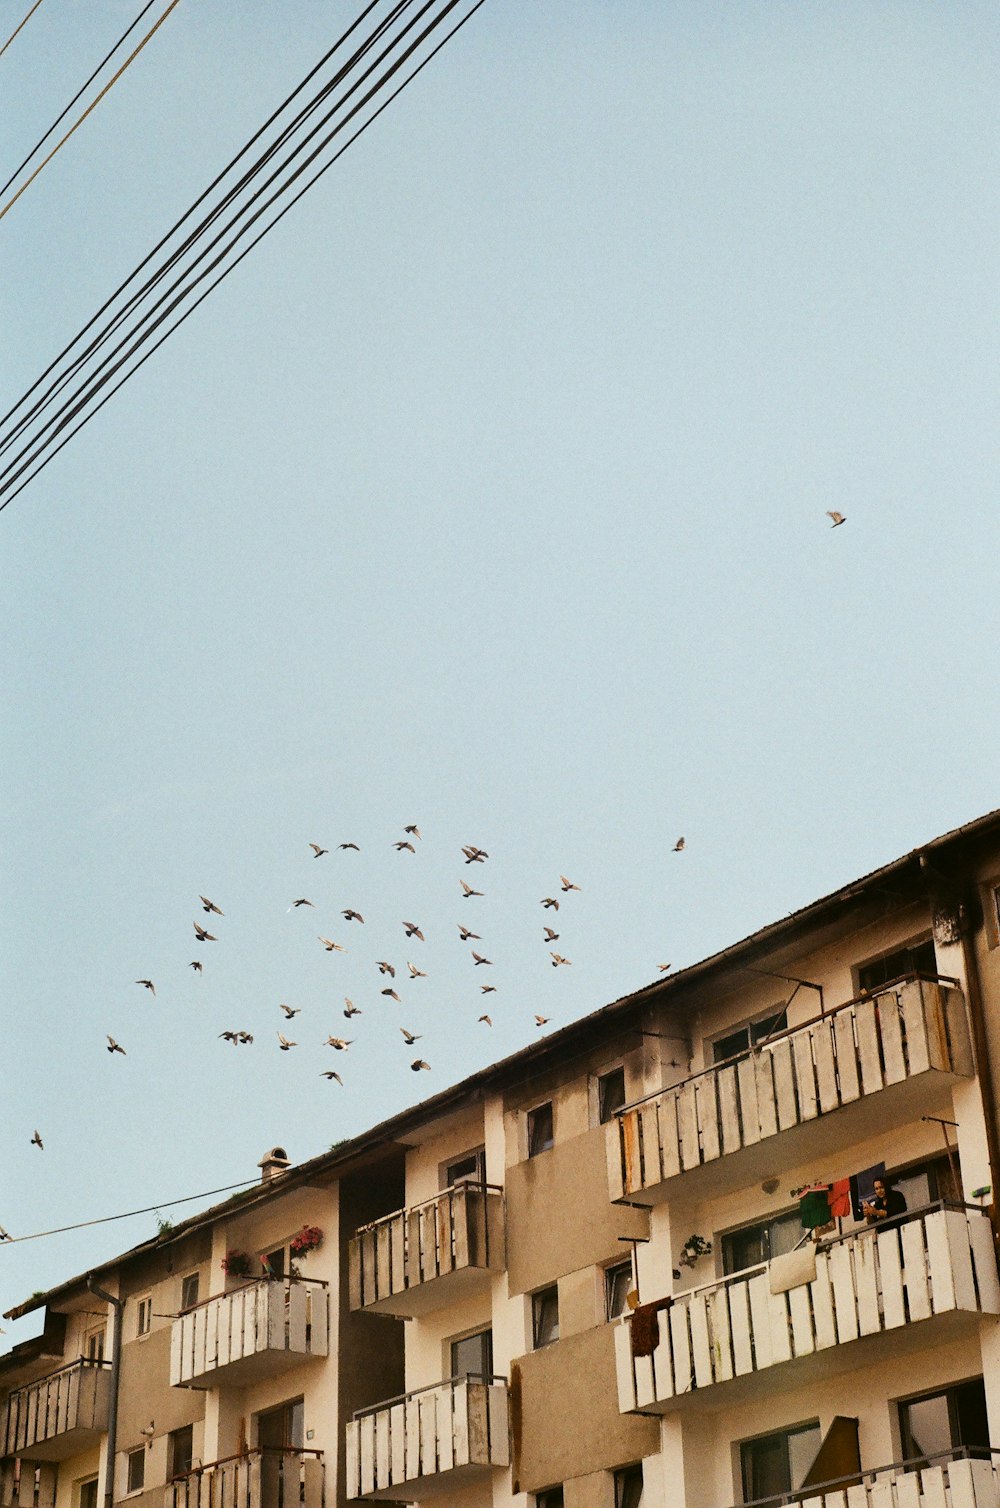 flock of birds flying over the building during daytime